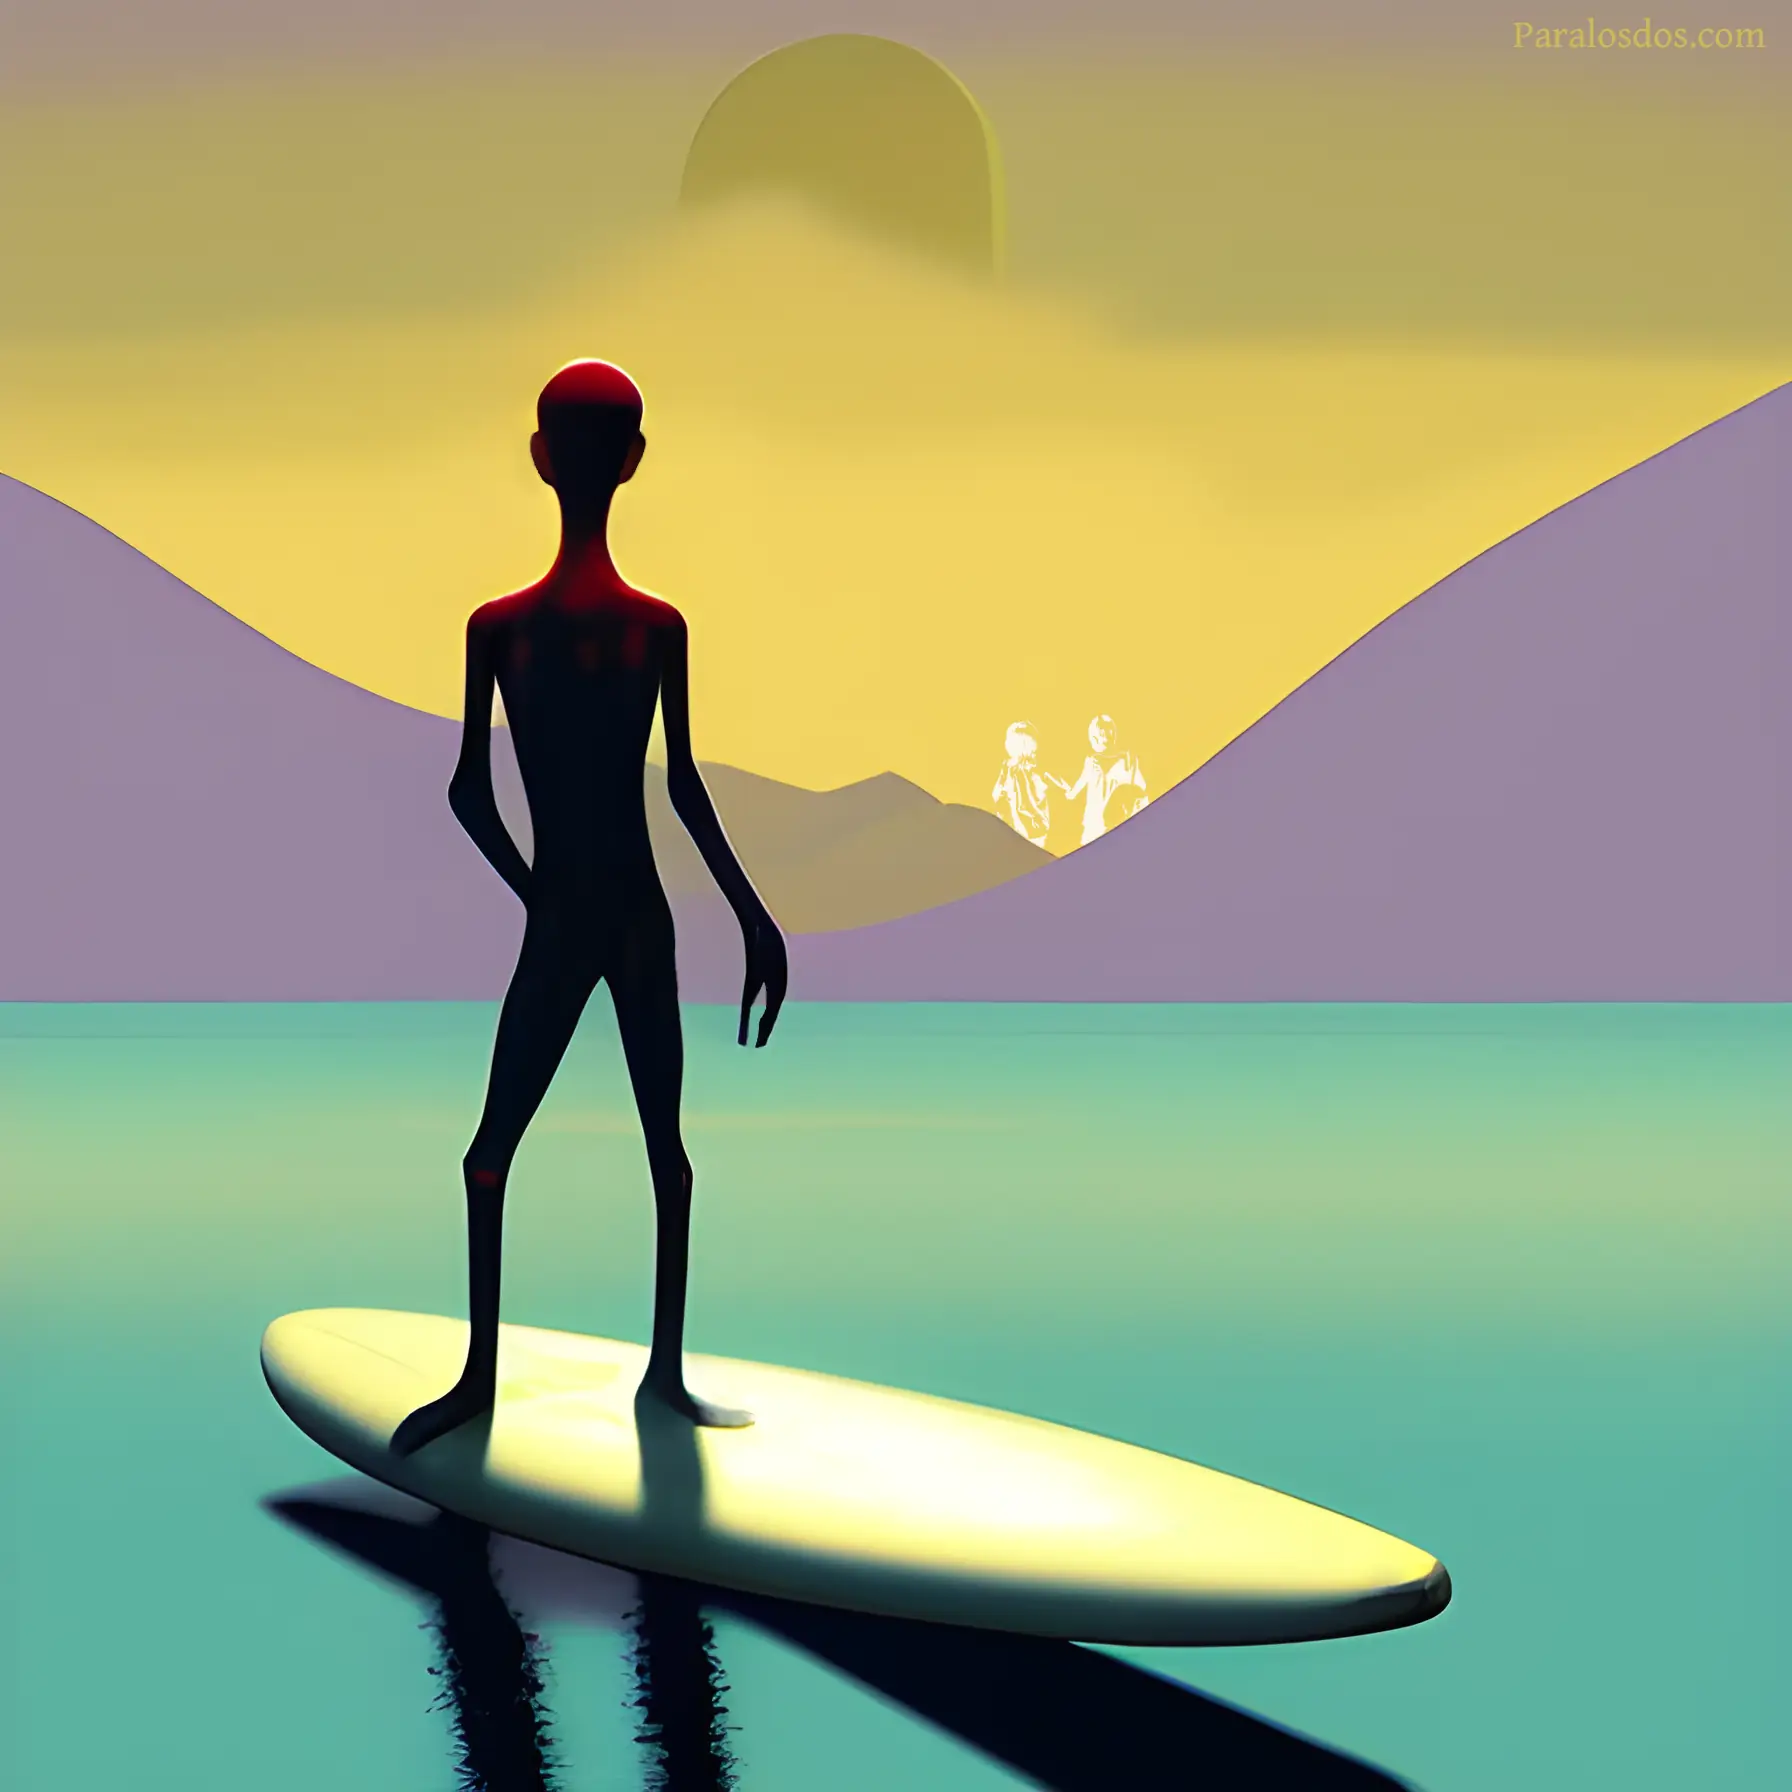 An artistic rendering of a thin, vaguely alien looking figure is standing on a floating surfboard. There are mountains and a sunset in the background.